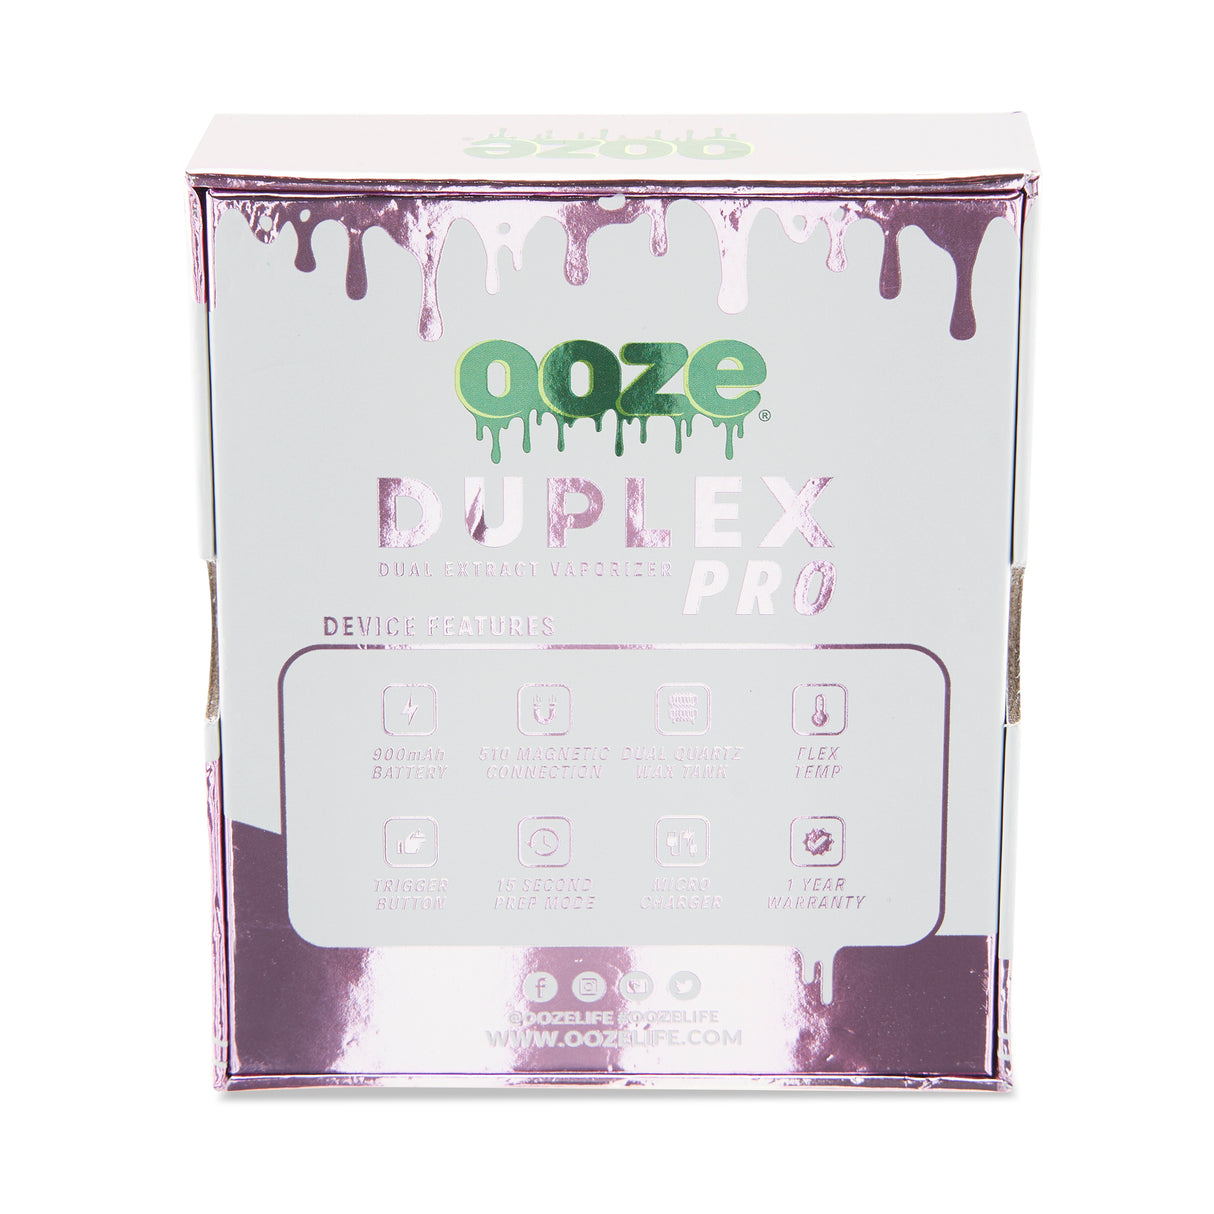 The back of the packaging for The Ice Pink Ooze Duplex Pro Vaporizer.